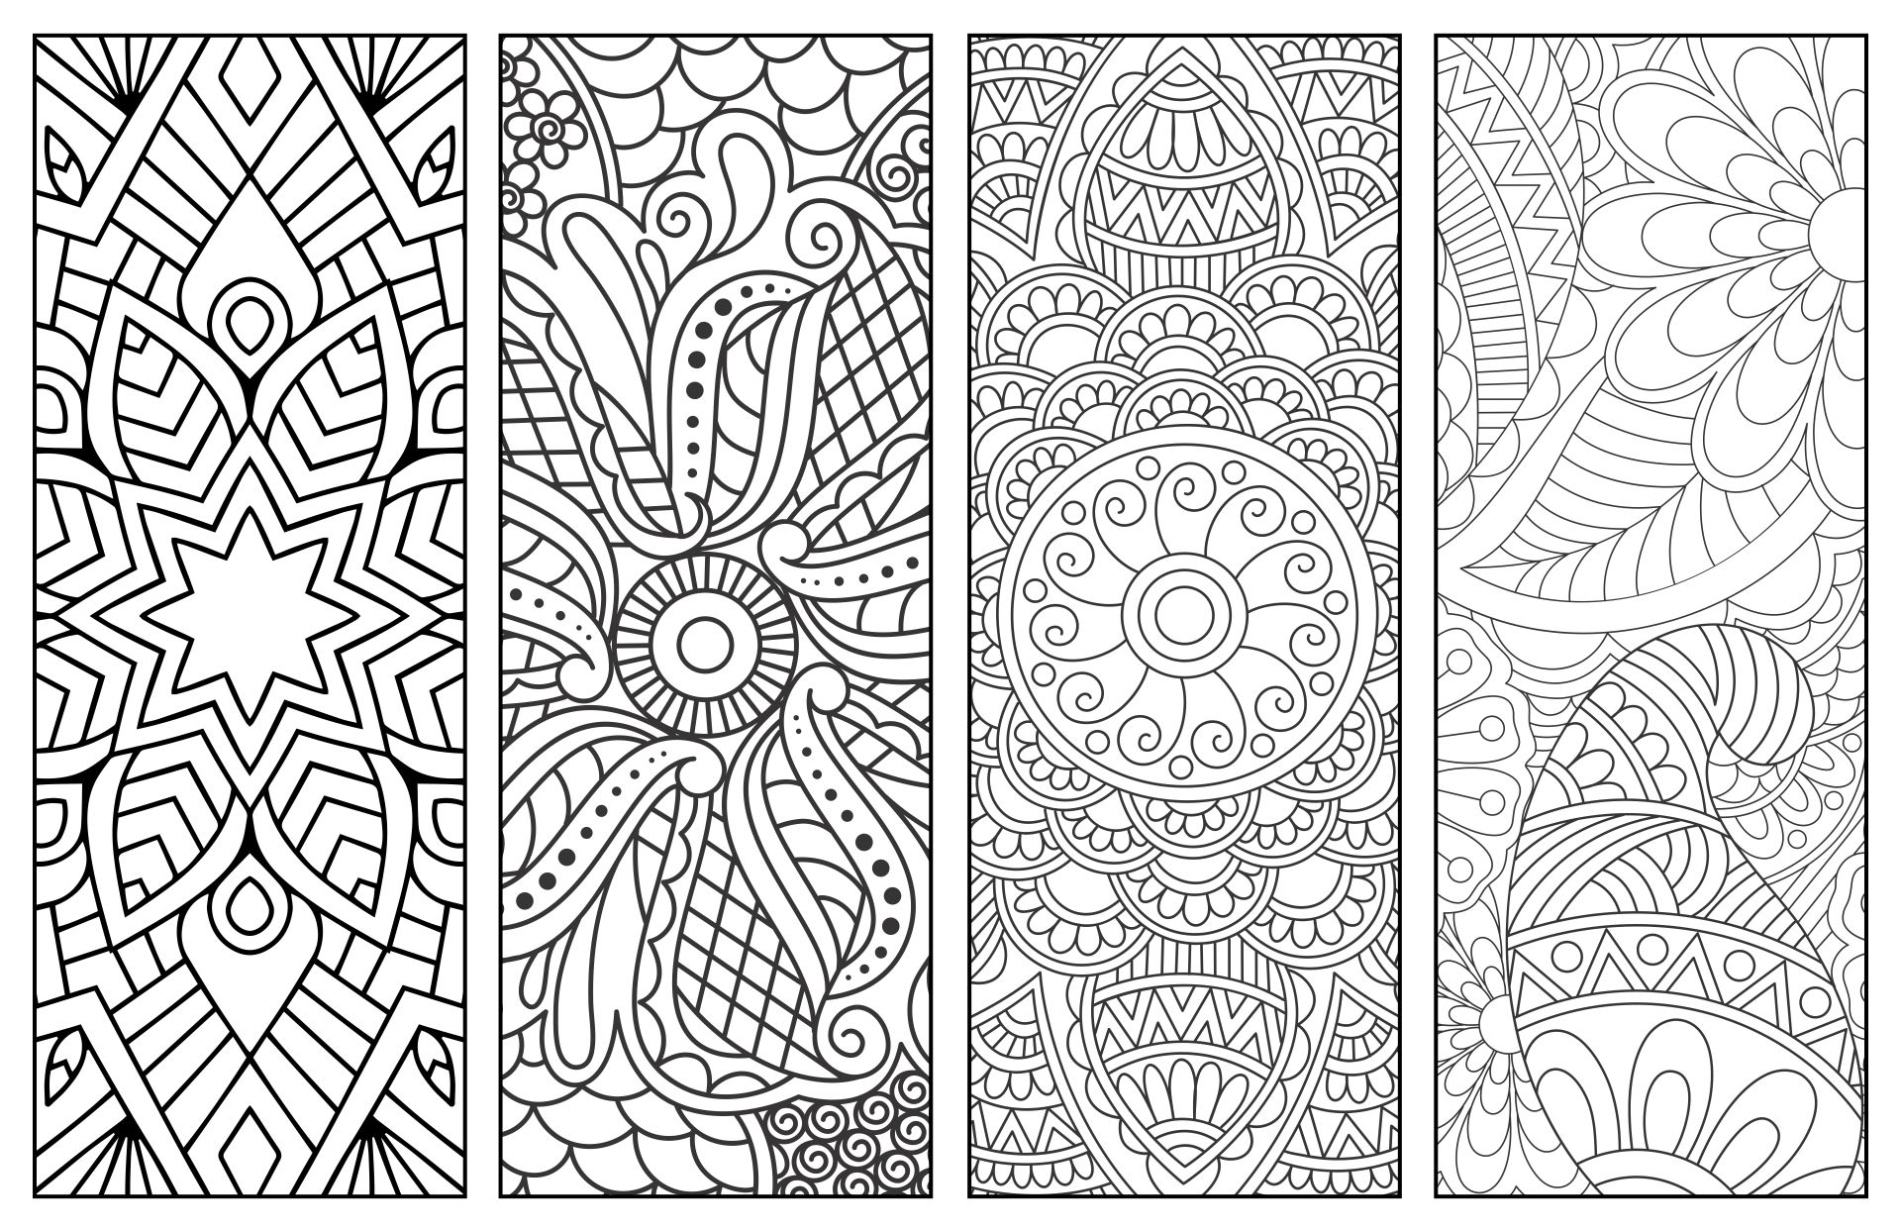 Coloring Bookmarks Free Printable - Printable Word Searches Within Free Blank Bookmark Templates To Print